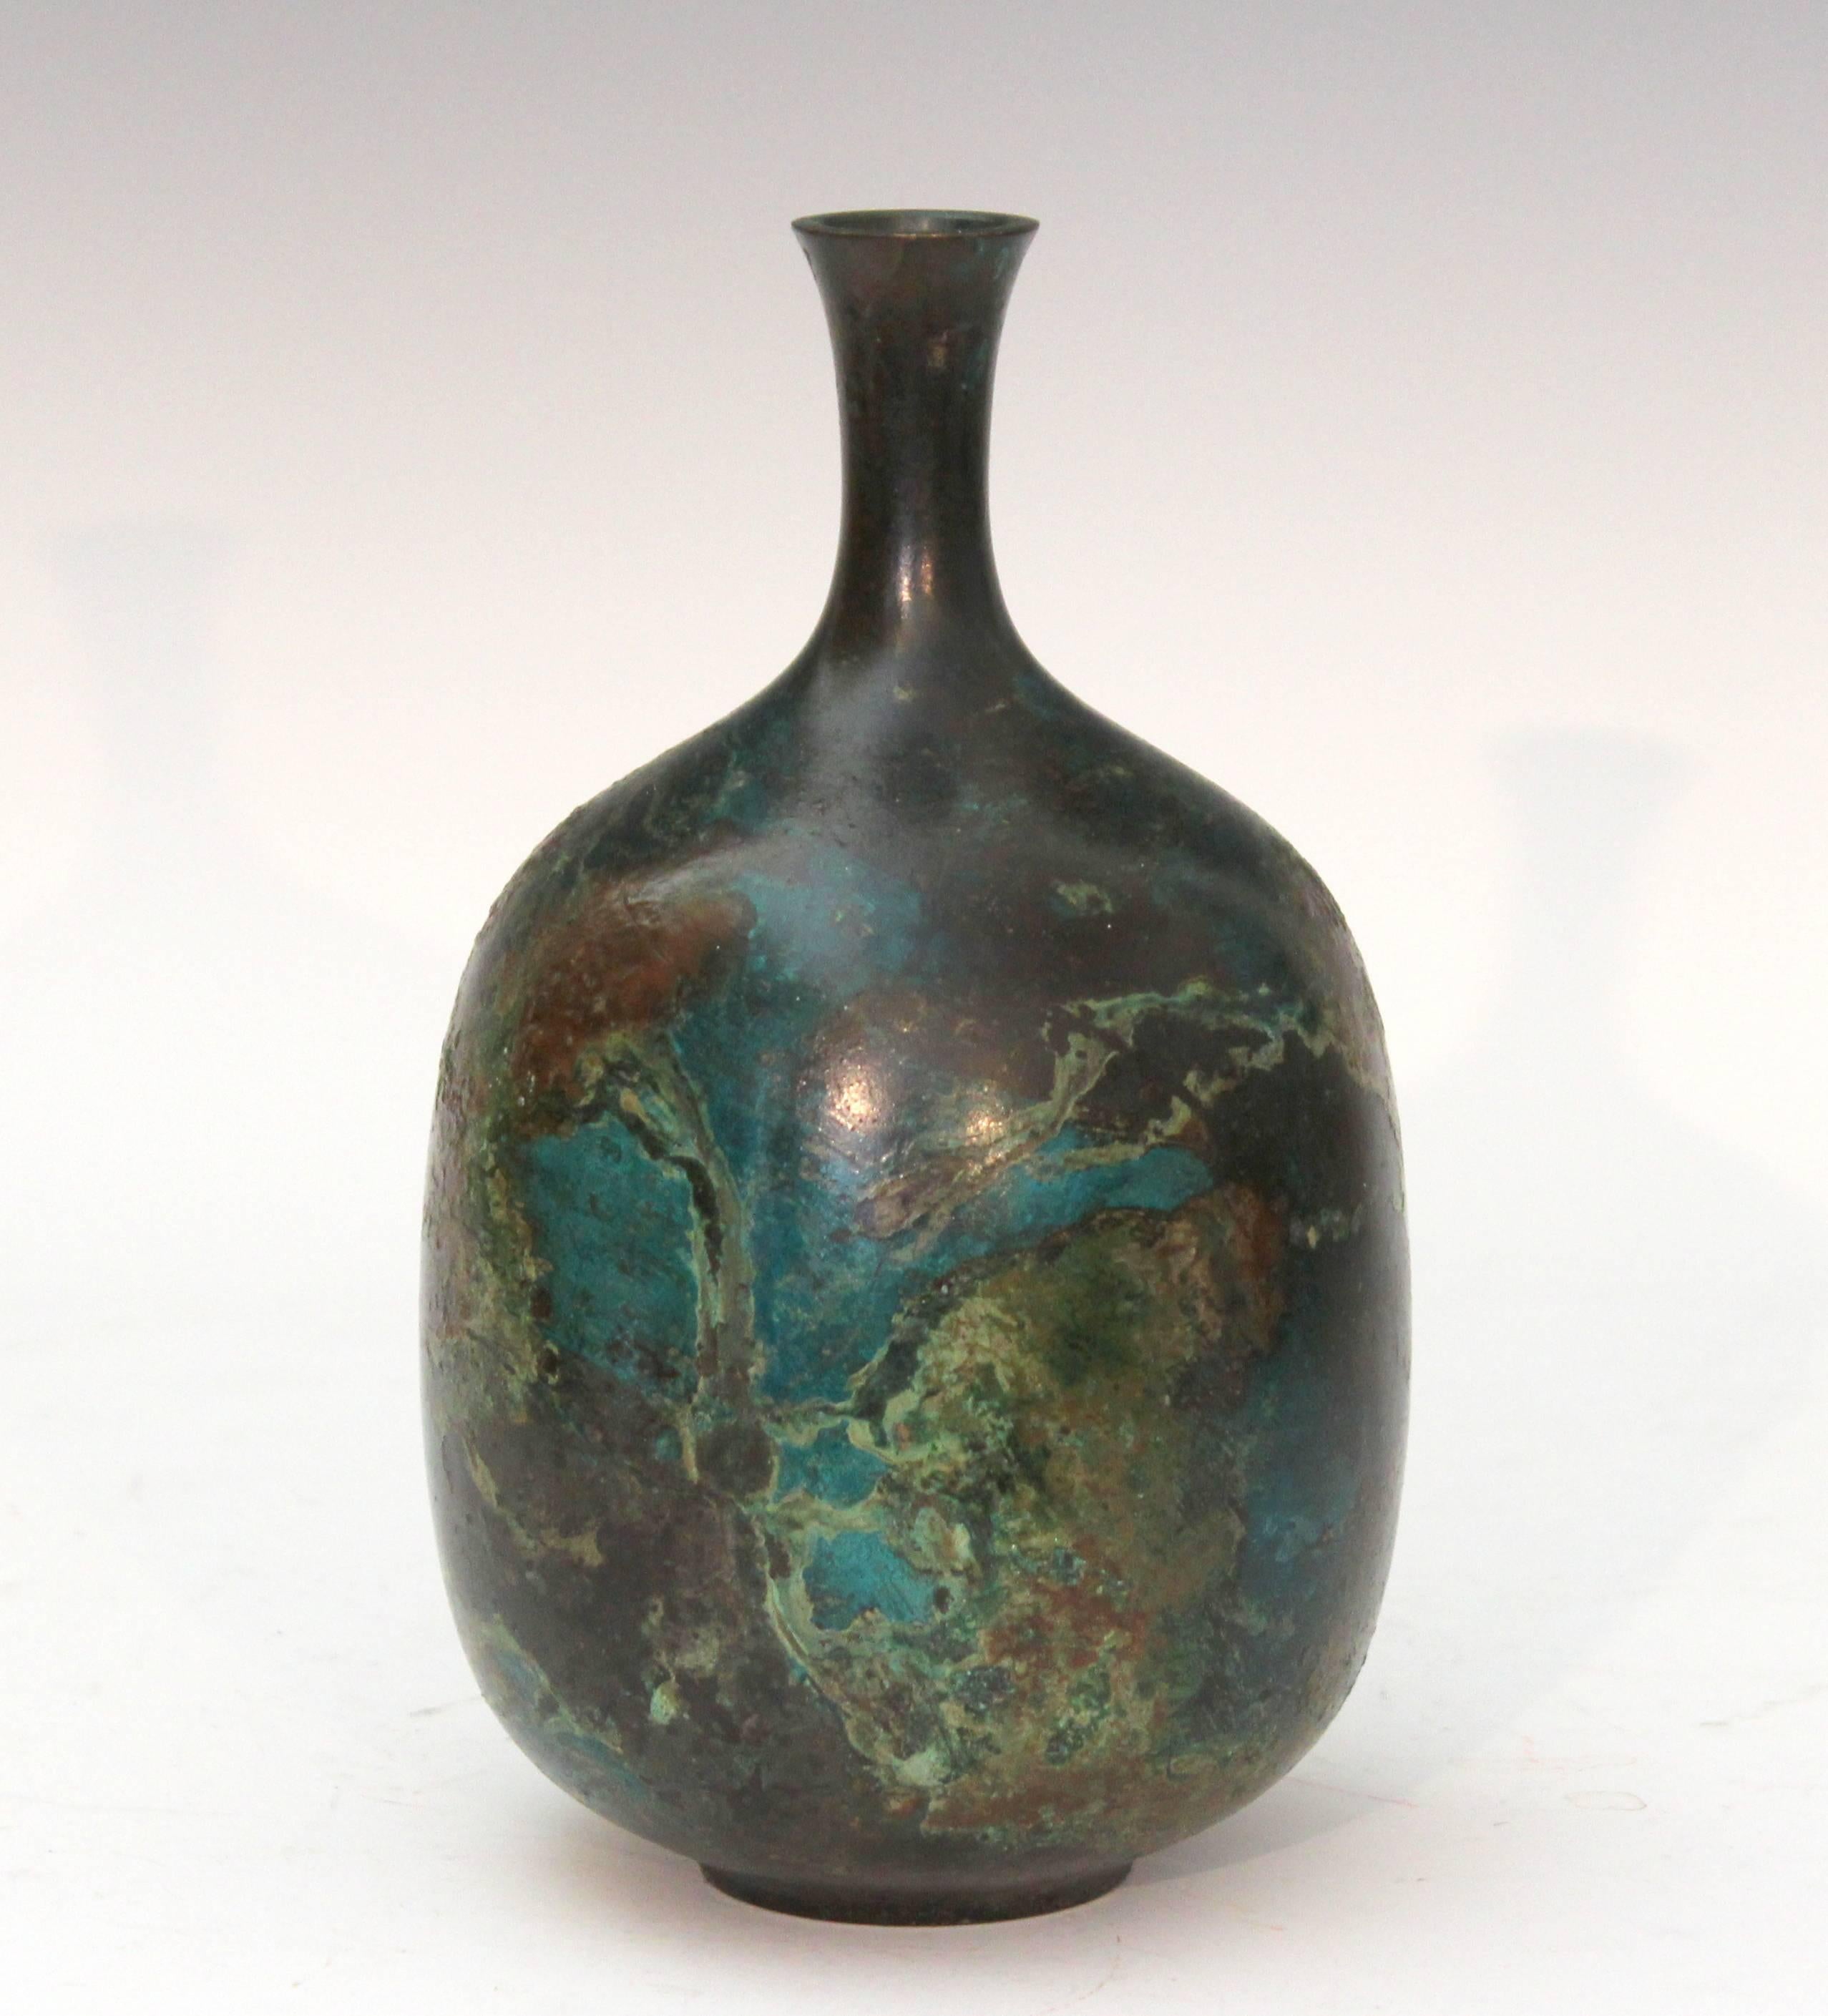 Vintage Japanese bronze bottle vase with interesting green, brown, black applied patina, circa mid-late 20th century. 7 5/8